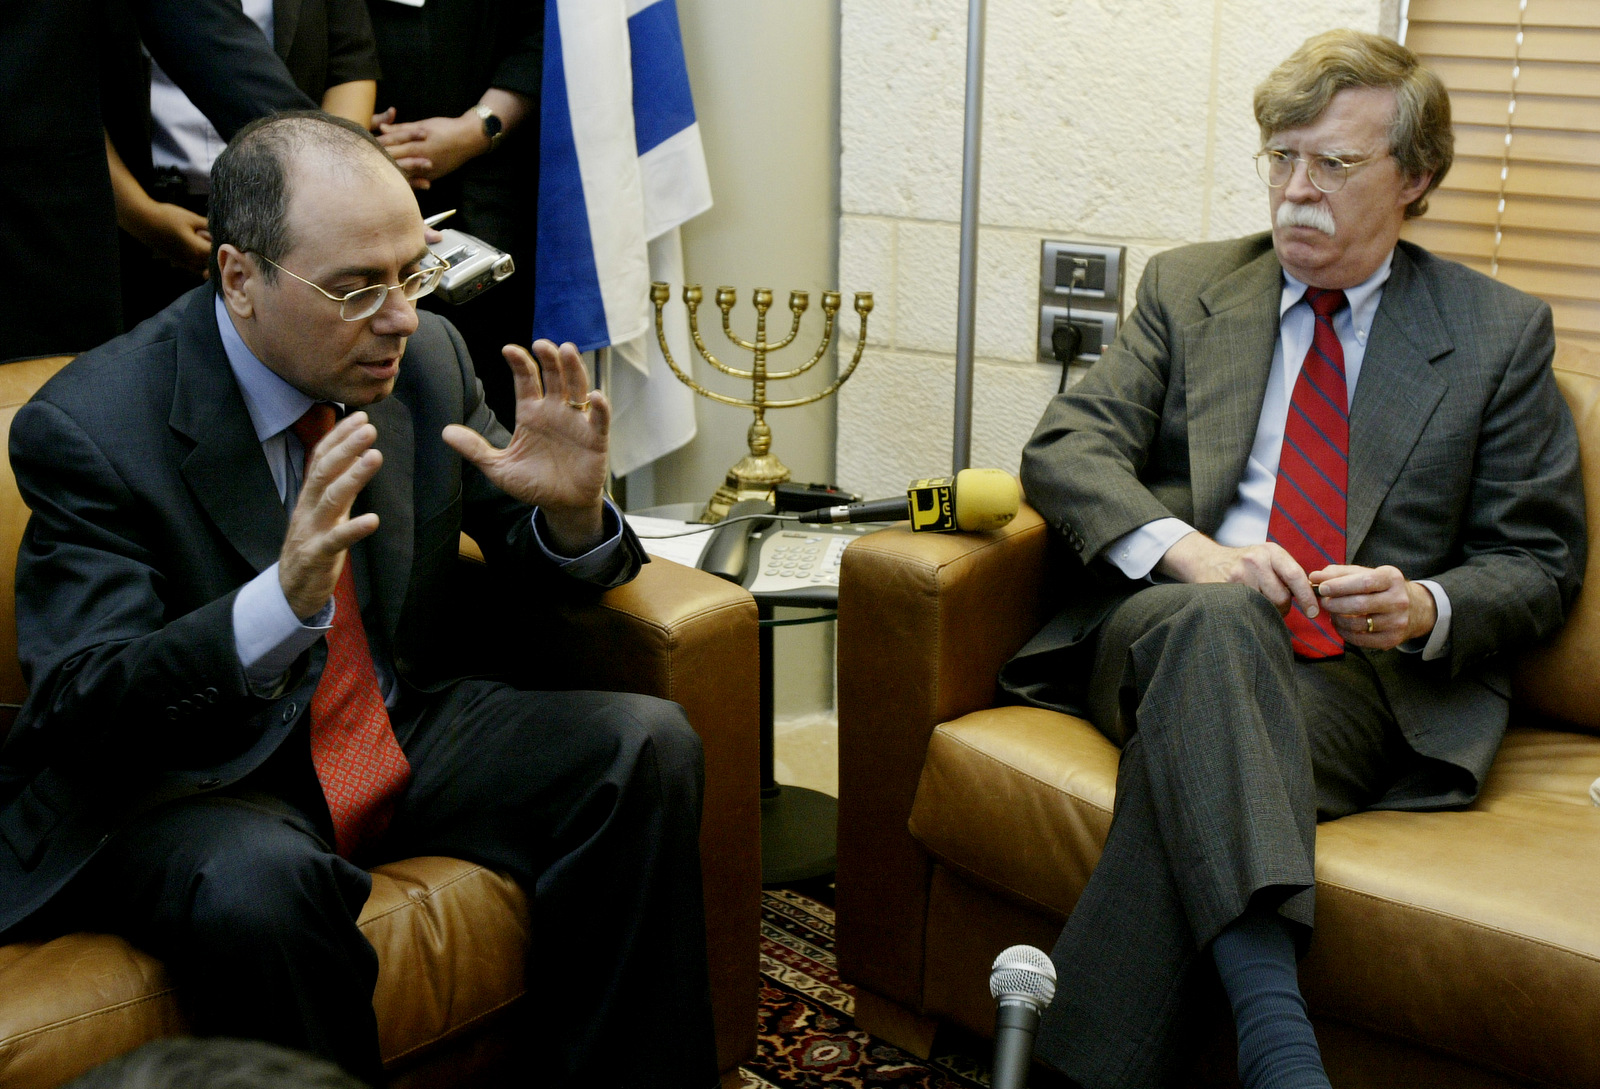 John R. Bolton meets with the Israeli Foreign Minister in Jerusalem in 2004 about U.N. sanctions against Iran over its alleged quest for nuclear weapons. (AP/Oded Balilty)